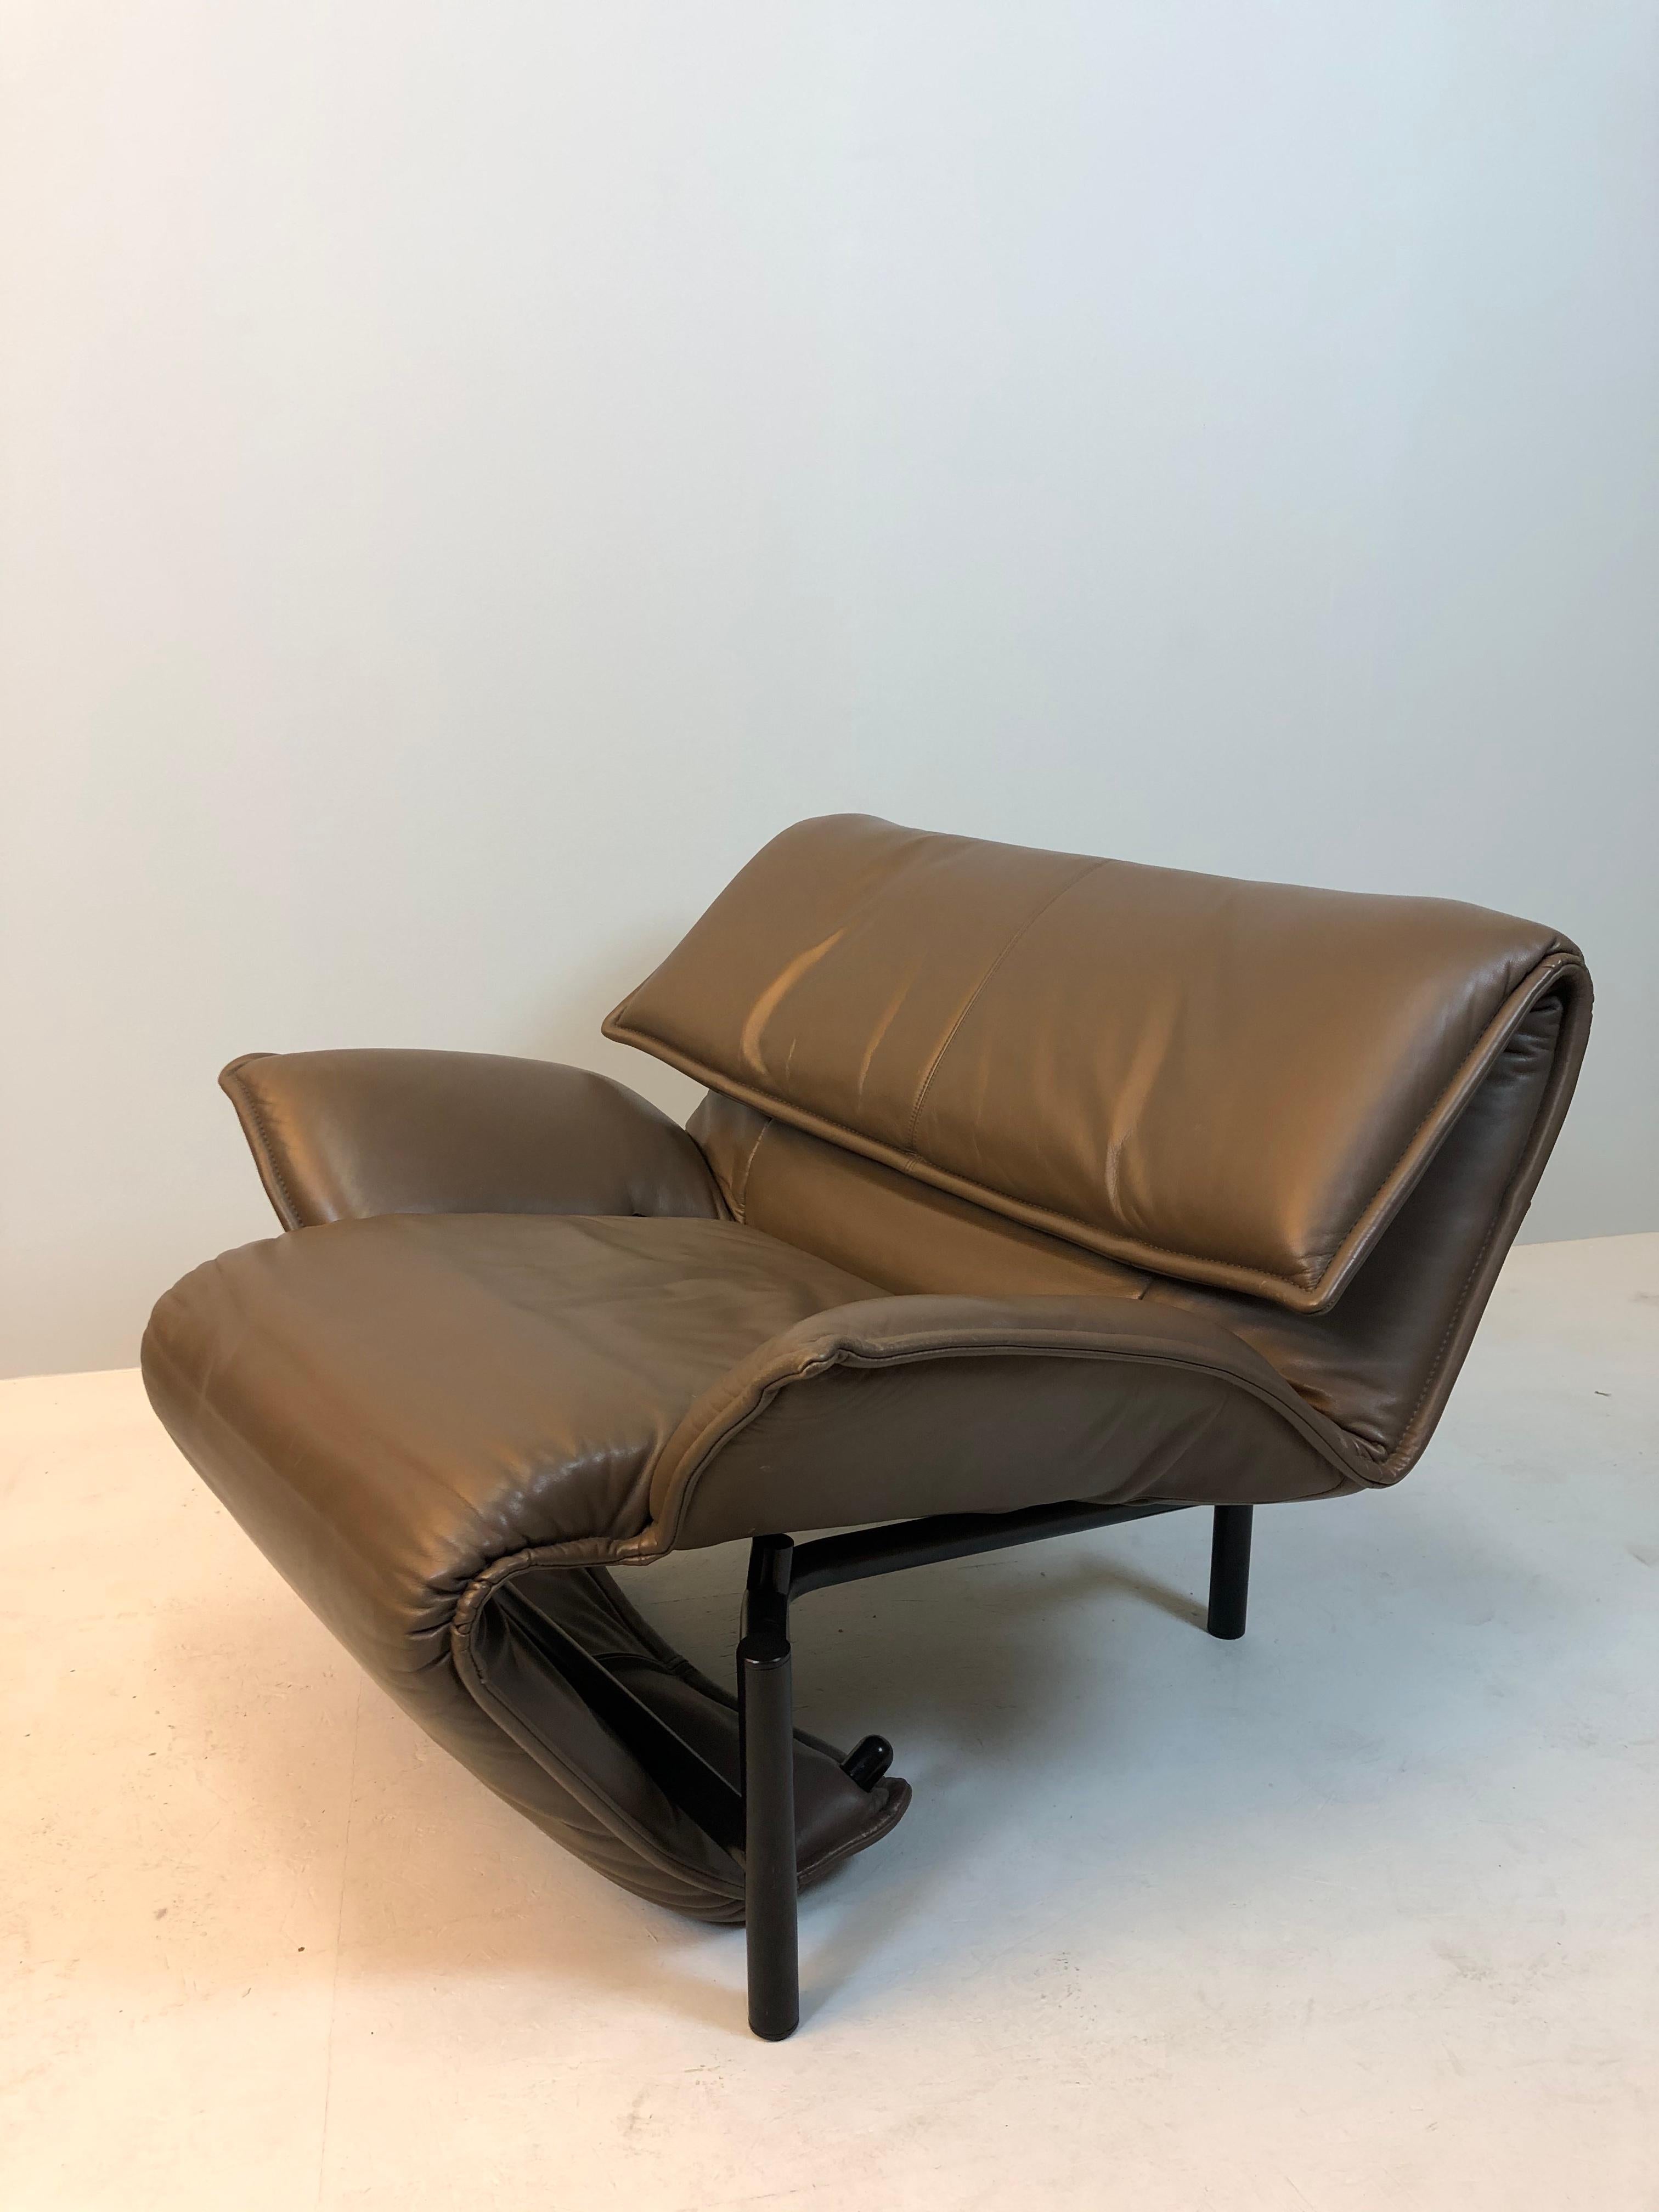 Designer leather armchair by Vico Magistretti for Cassina

Original Cassina design classic in brown leather

Dimensions: depending on the setting approx. W: 90/D: 80/H: 76 cm

The Italian designer Vico Magistretti designed this chair in the